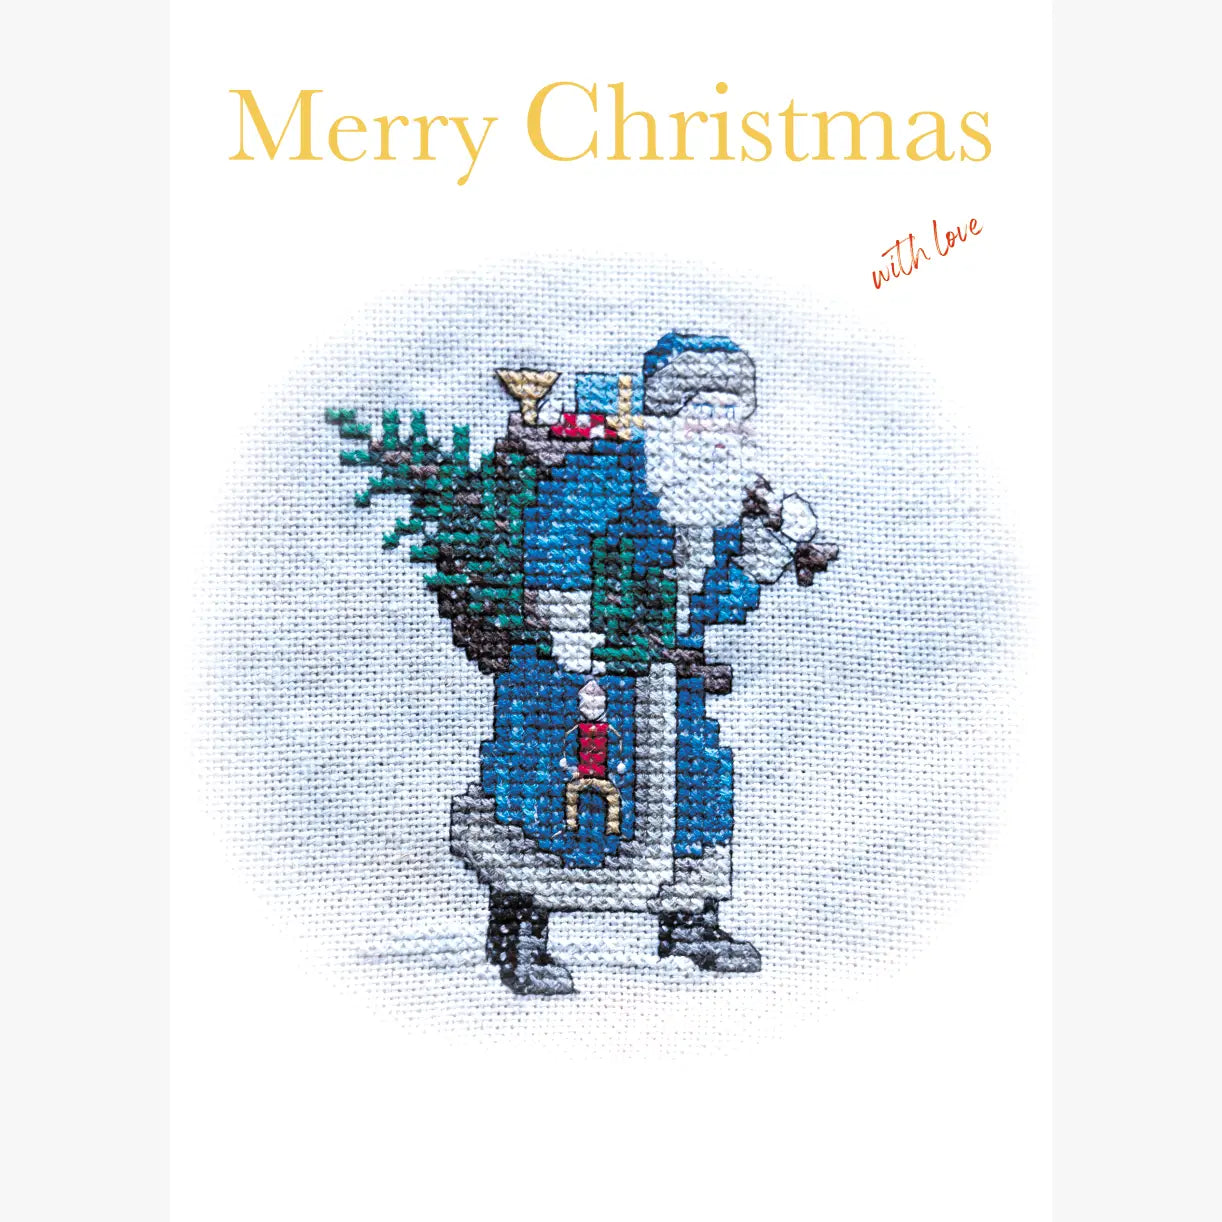 Merry Christmas with love - Greeting Card